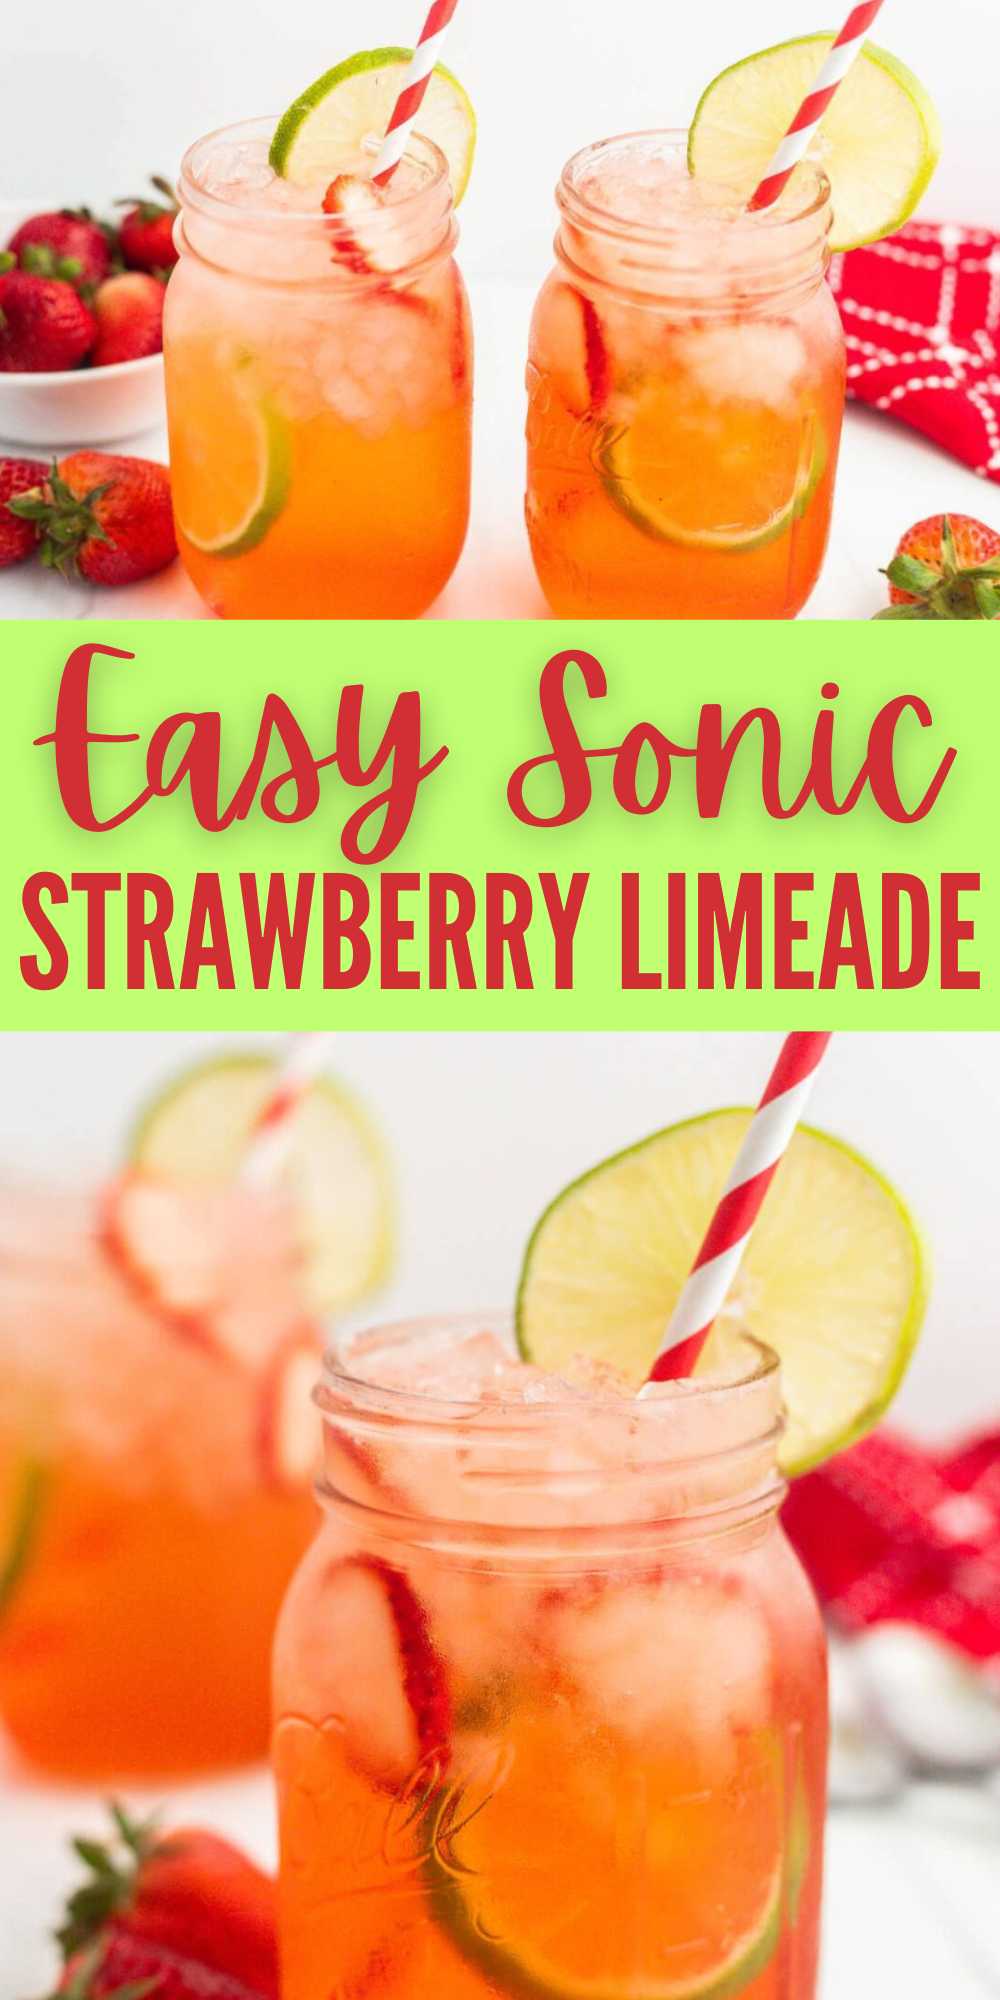 Sonic Strawberry Limeade Recipe is an easy copycat recipe for refreshing Strawberry Limeade. Enjoy this drink and skip the drive thru. You can even place a sliced strawberry on each glass for an extra special touch. It is a great drink to serve for parties and cookouts. #eatingonadime #sonicstrawberrylimeade #strawberrylimeade